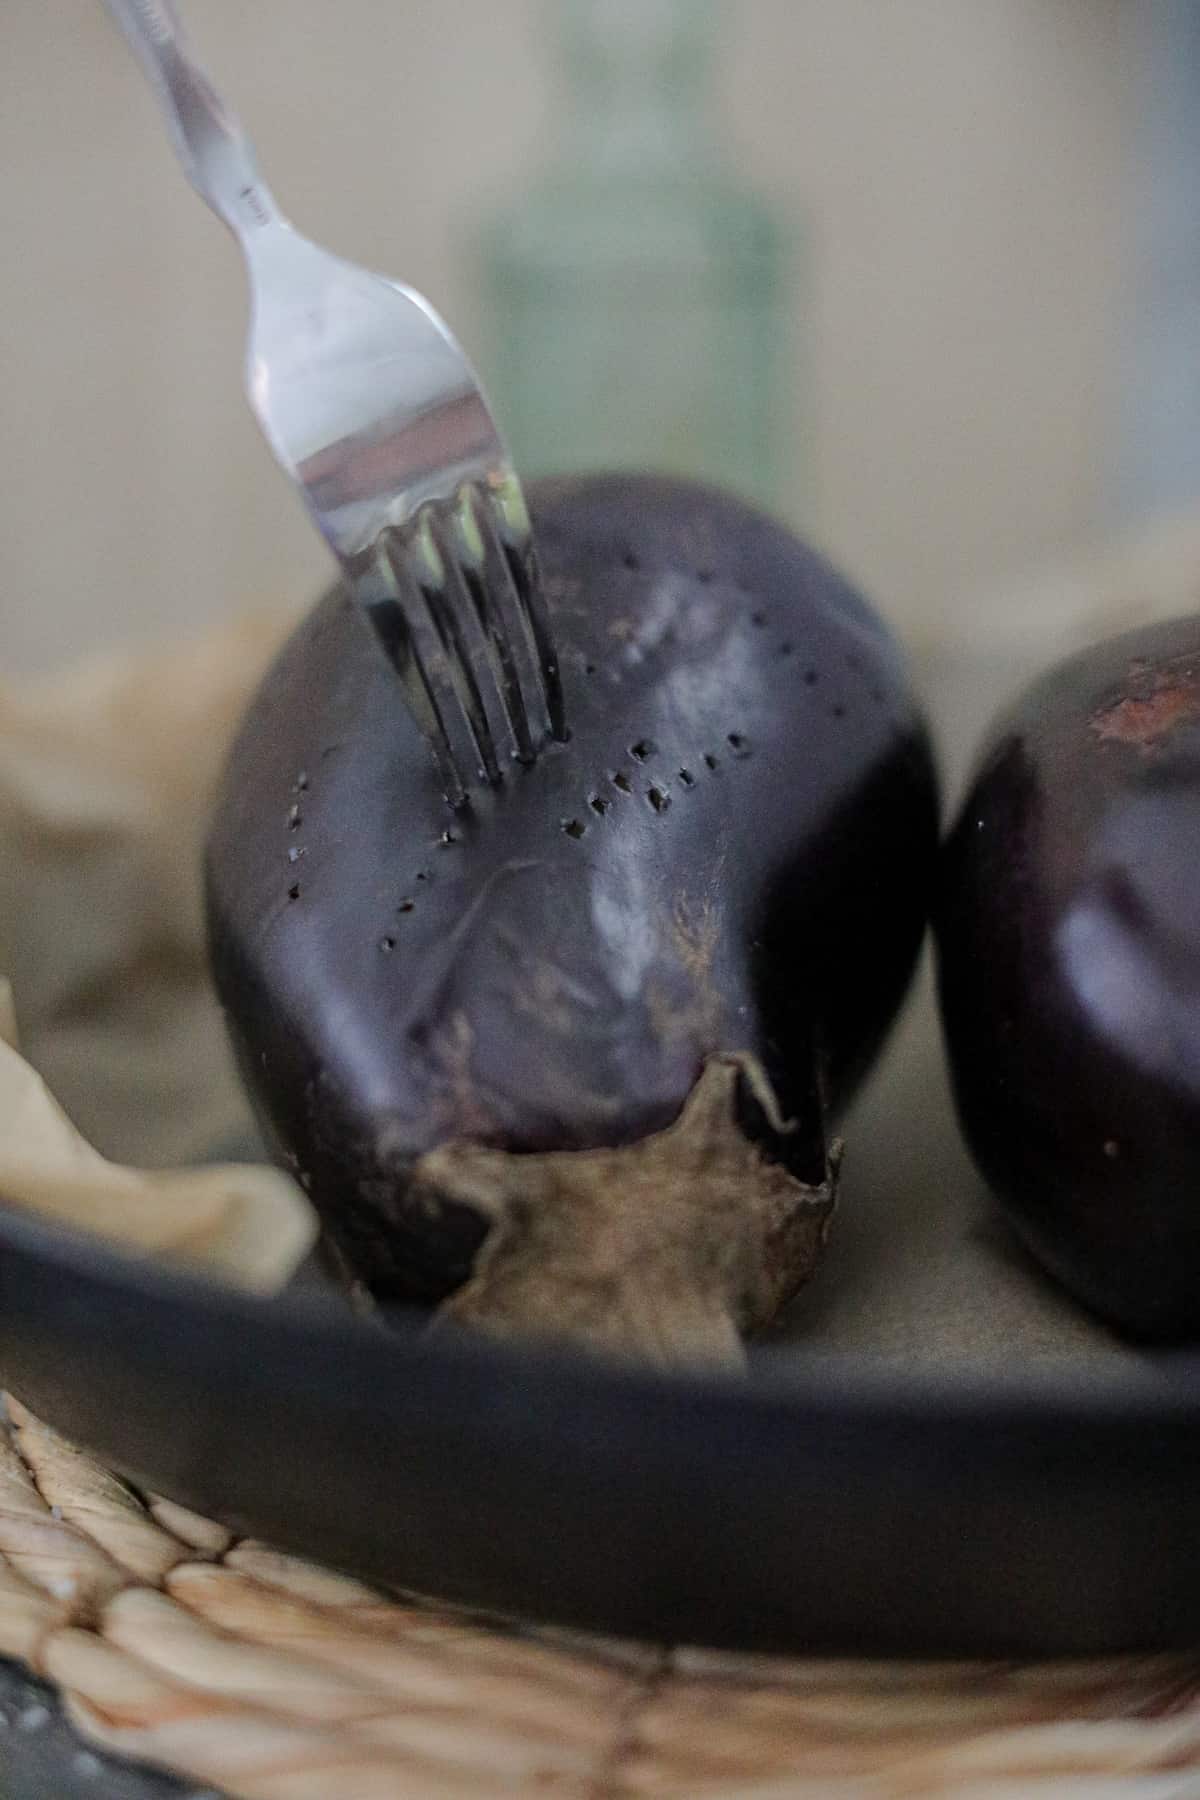 Eggplant being pierced with fork.